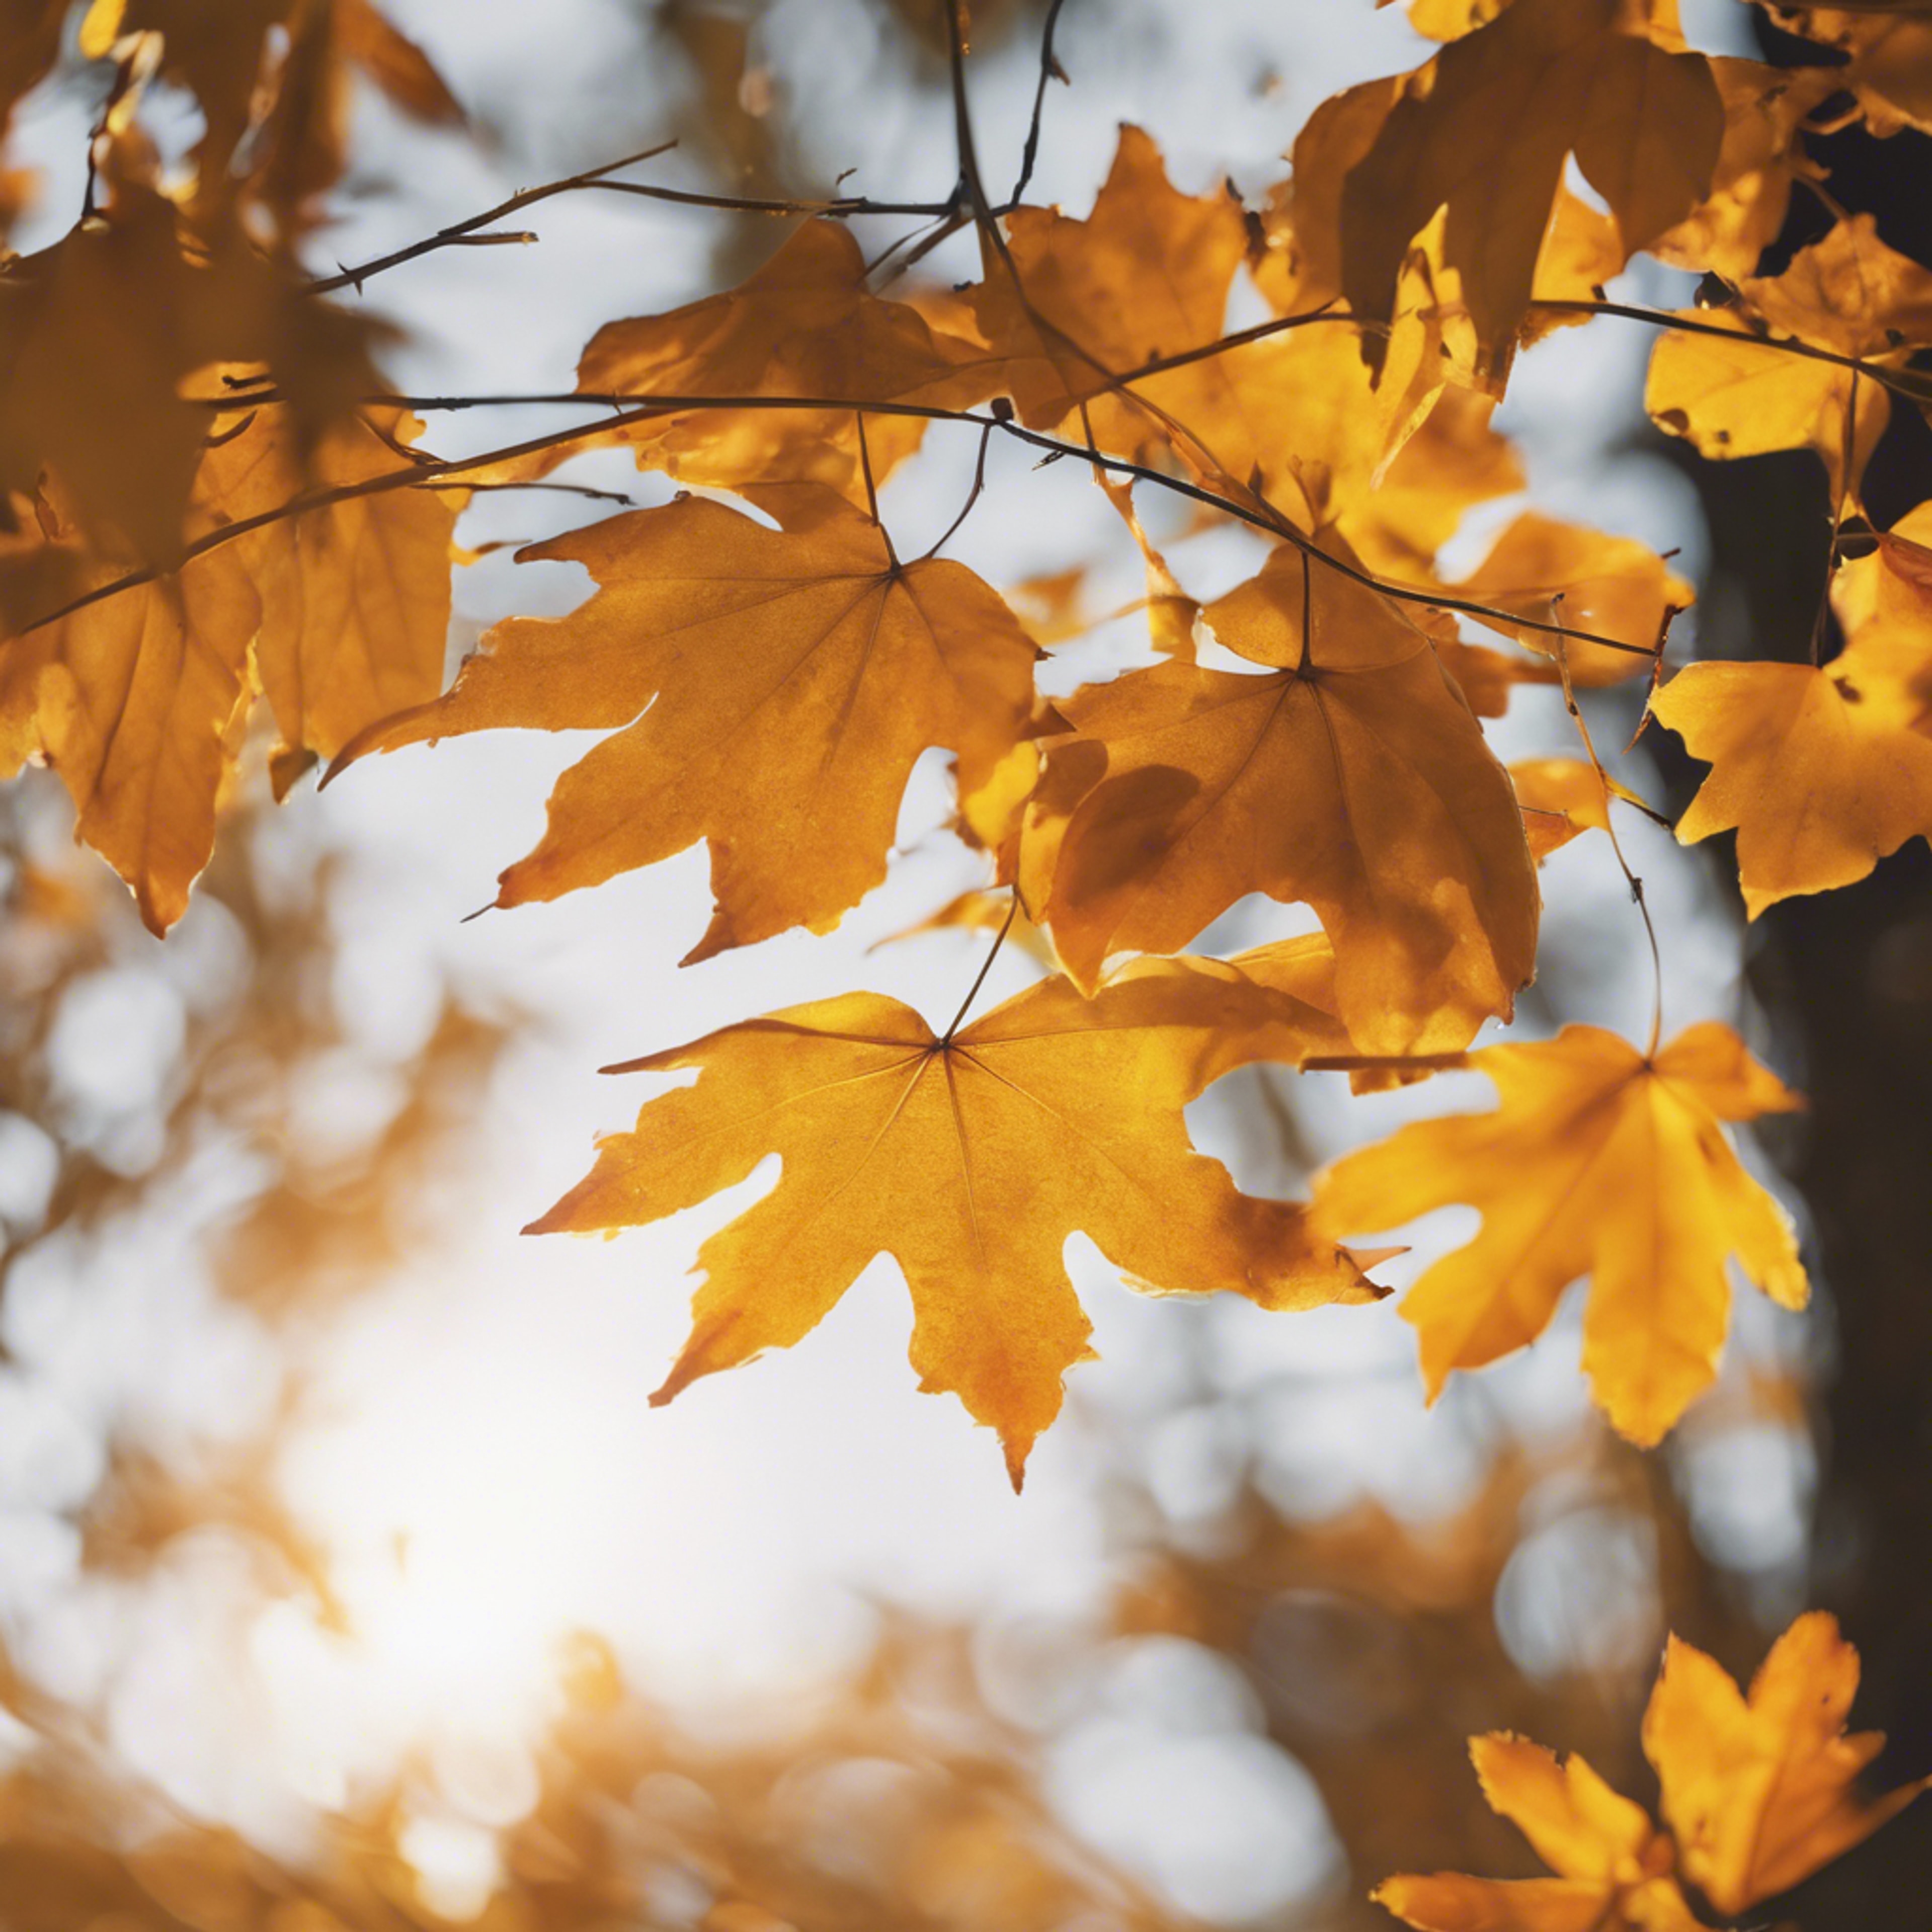 A close look at yellow-orange fall leaves, with the light streaming through. Обои[f7b27726e627433697dc]